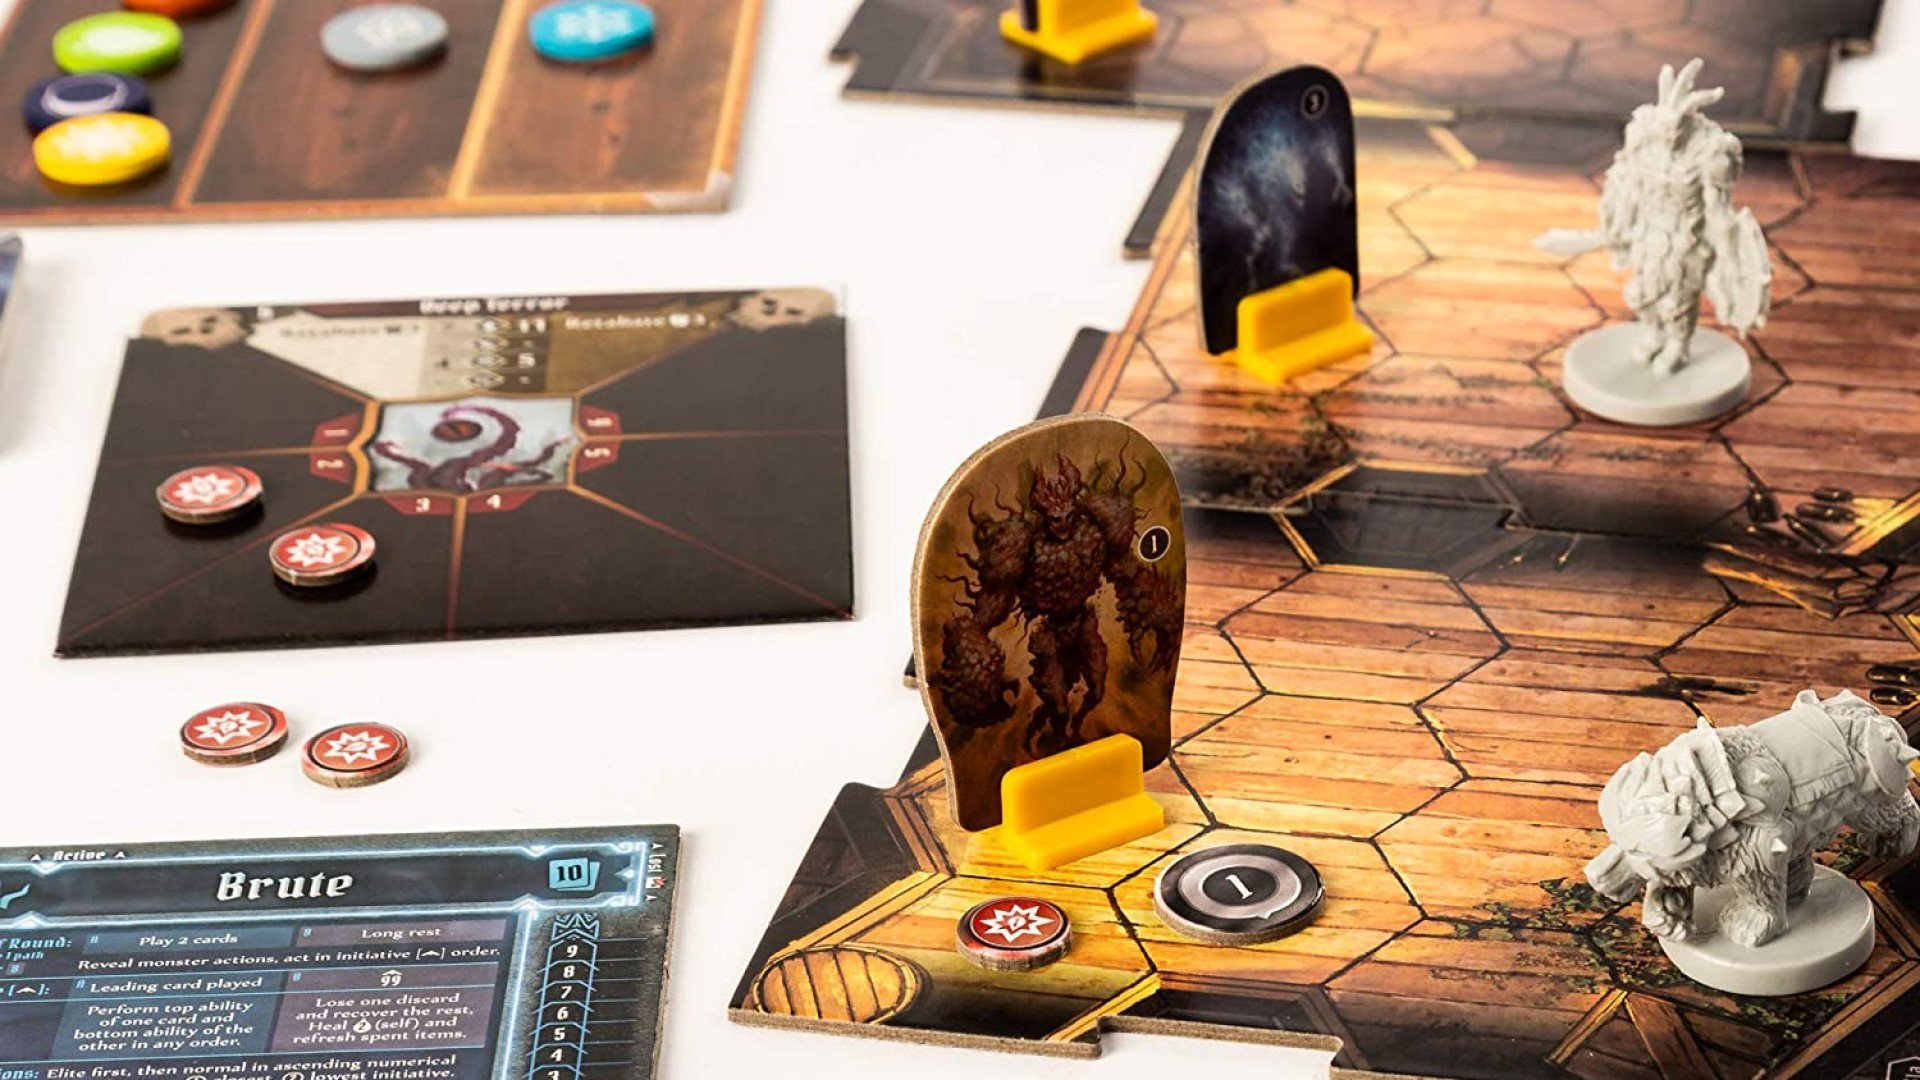 Gloomhaven review - character minis and enemy standees on dungeon board, with various cards and tokens on the side